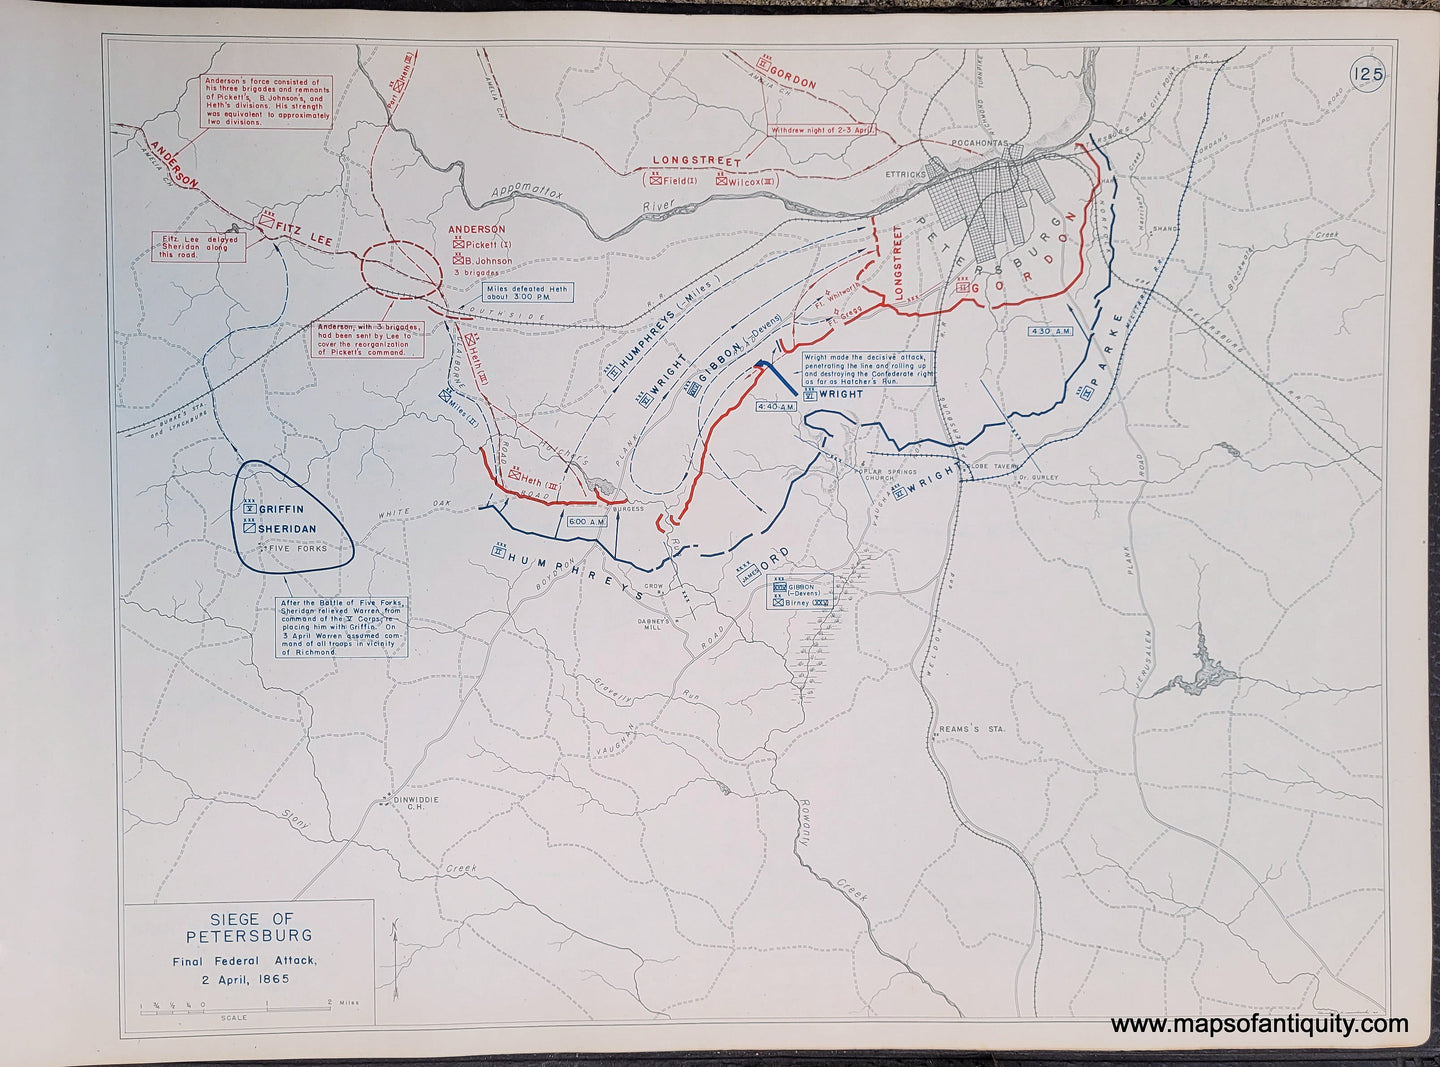 Genuine-Antique-Map-Siege-of-Petersburg-Final-Federal-Attack-2-April-1865-1948-Matthew-Forney-Steele-Dept-of-Military-Art-and-Engineering-US-Military-Academy-West-Point-Maps-Of-Antiquity